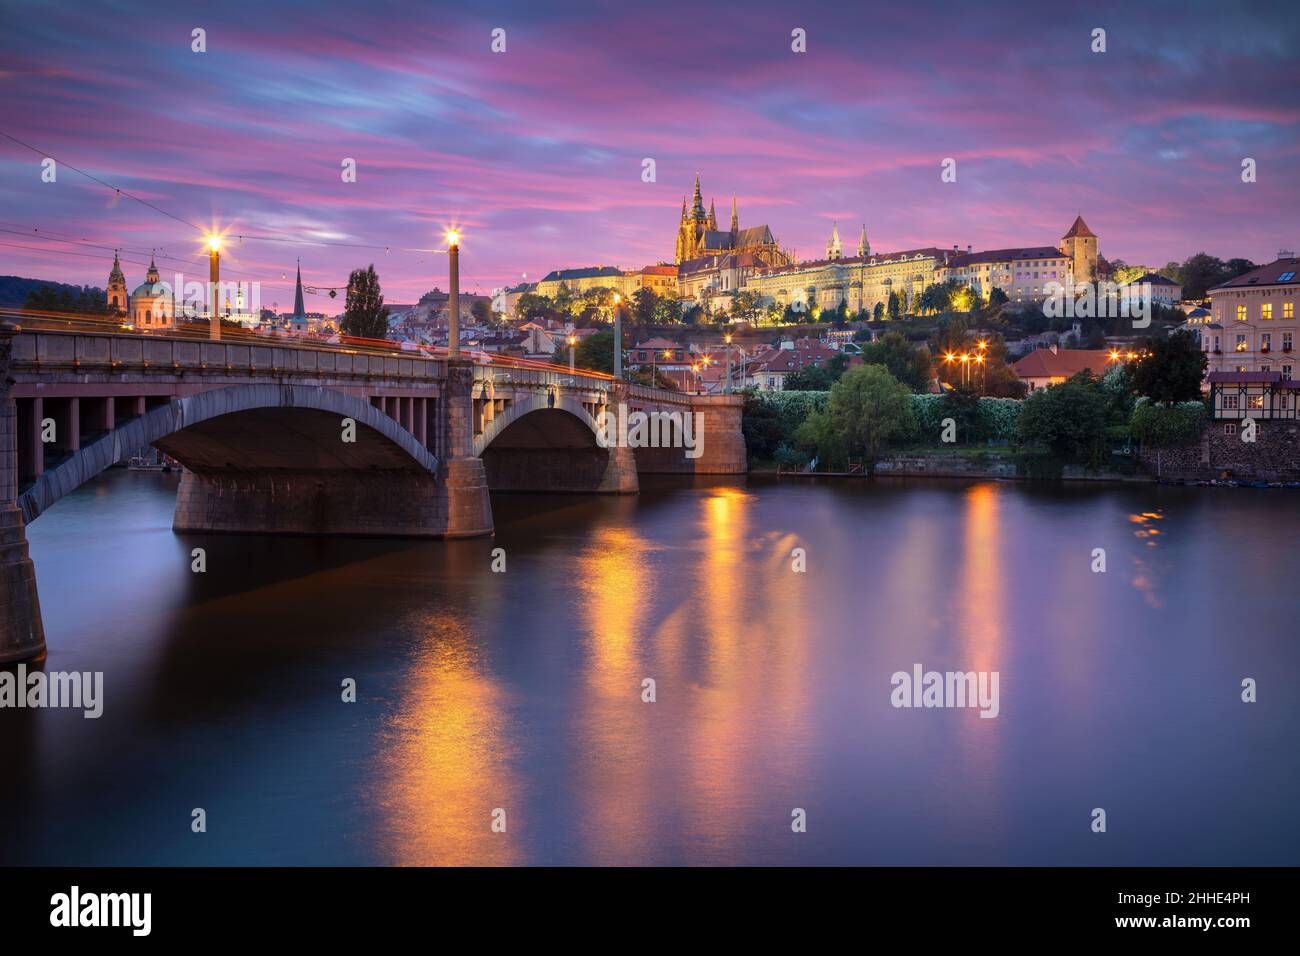 Prague, Czech Republic. Cityscape image of Prague, capital city of Czech Republic with St. Vitus Cathedral and the Charles Bridge over Vltava River at Stock Photo